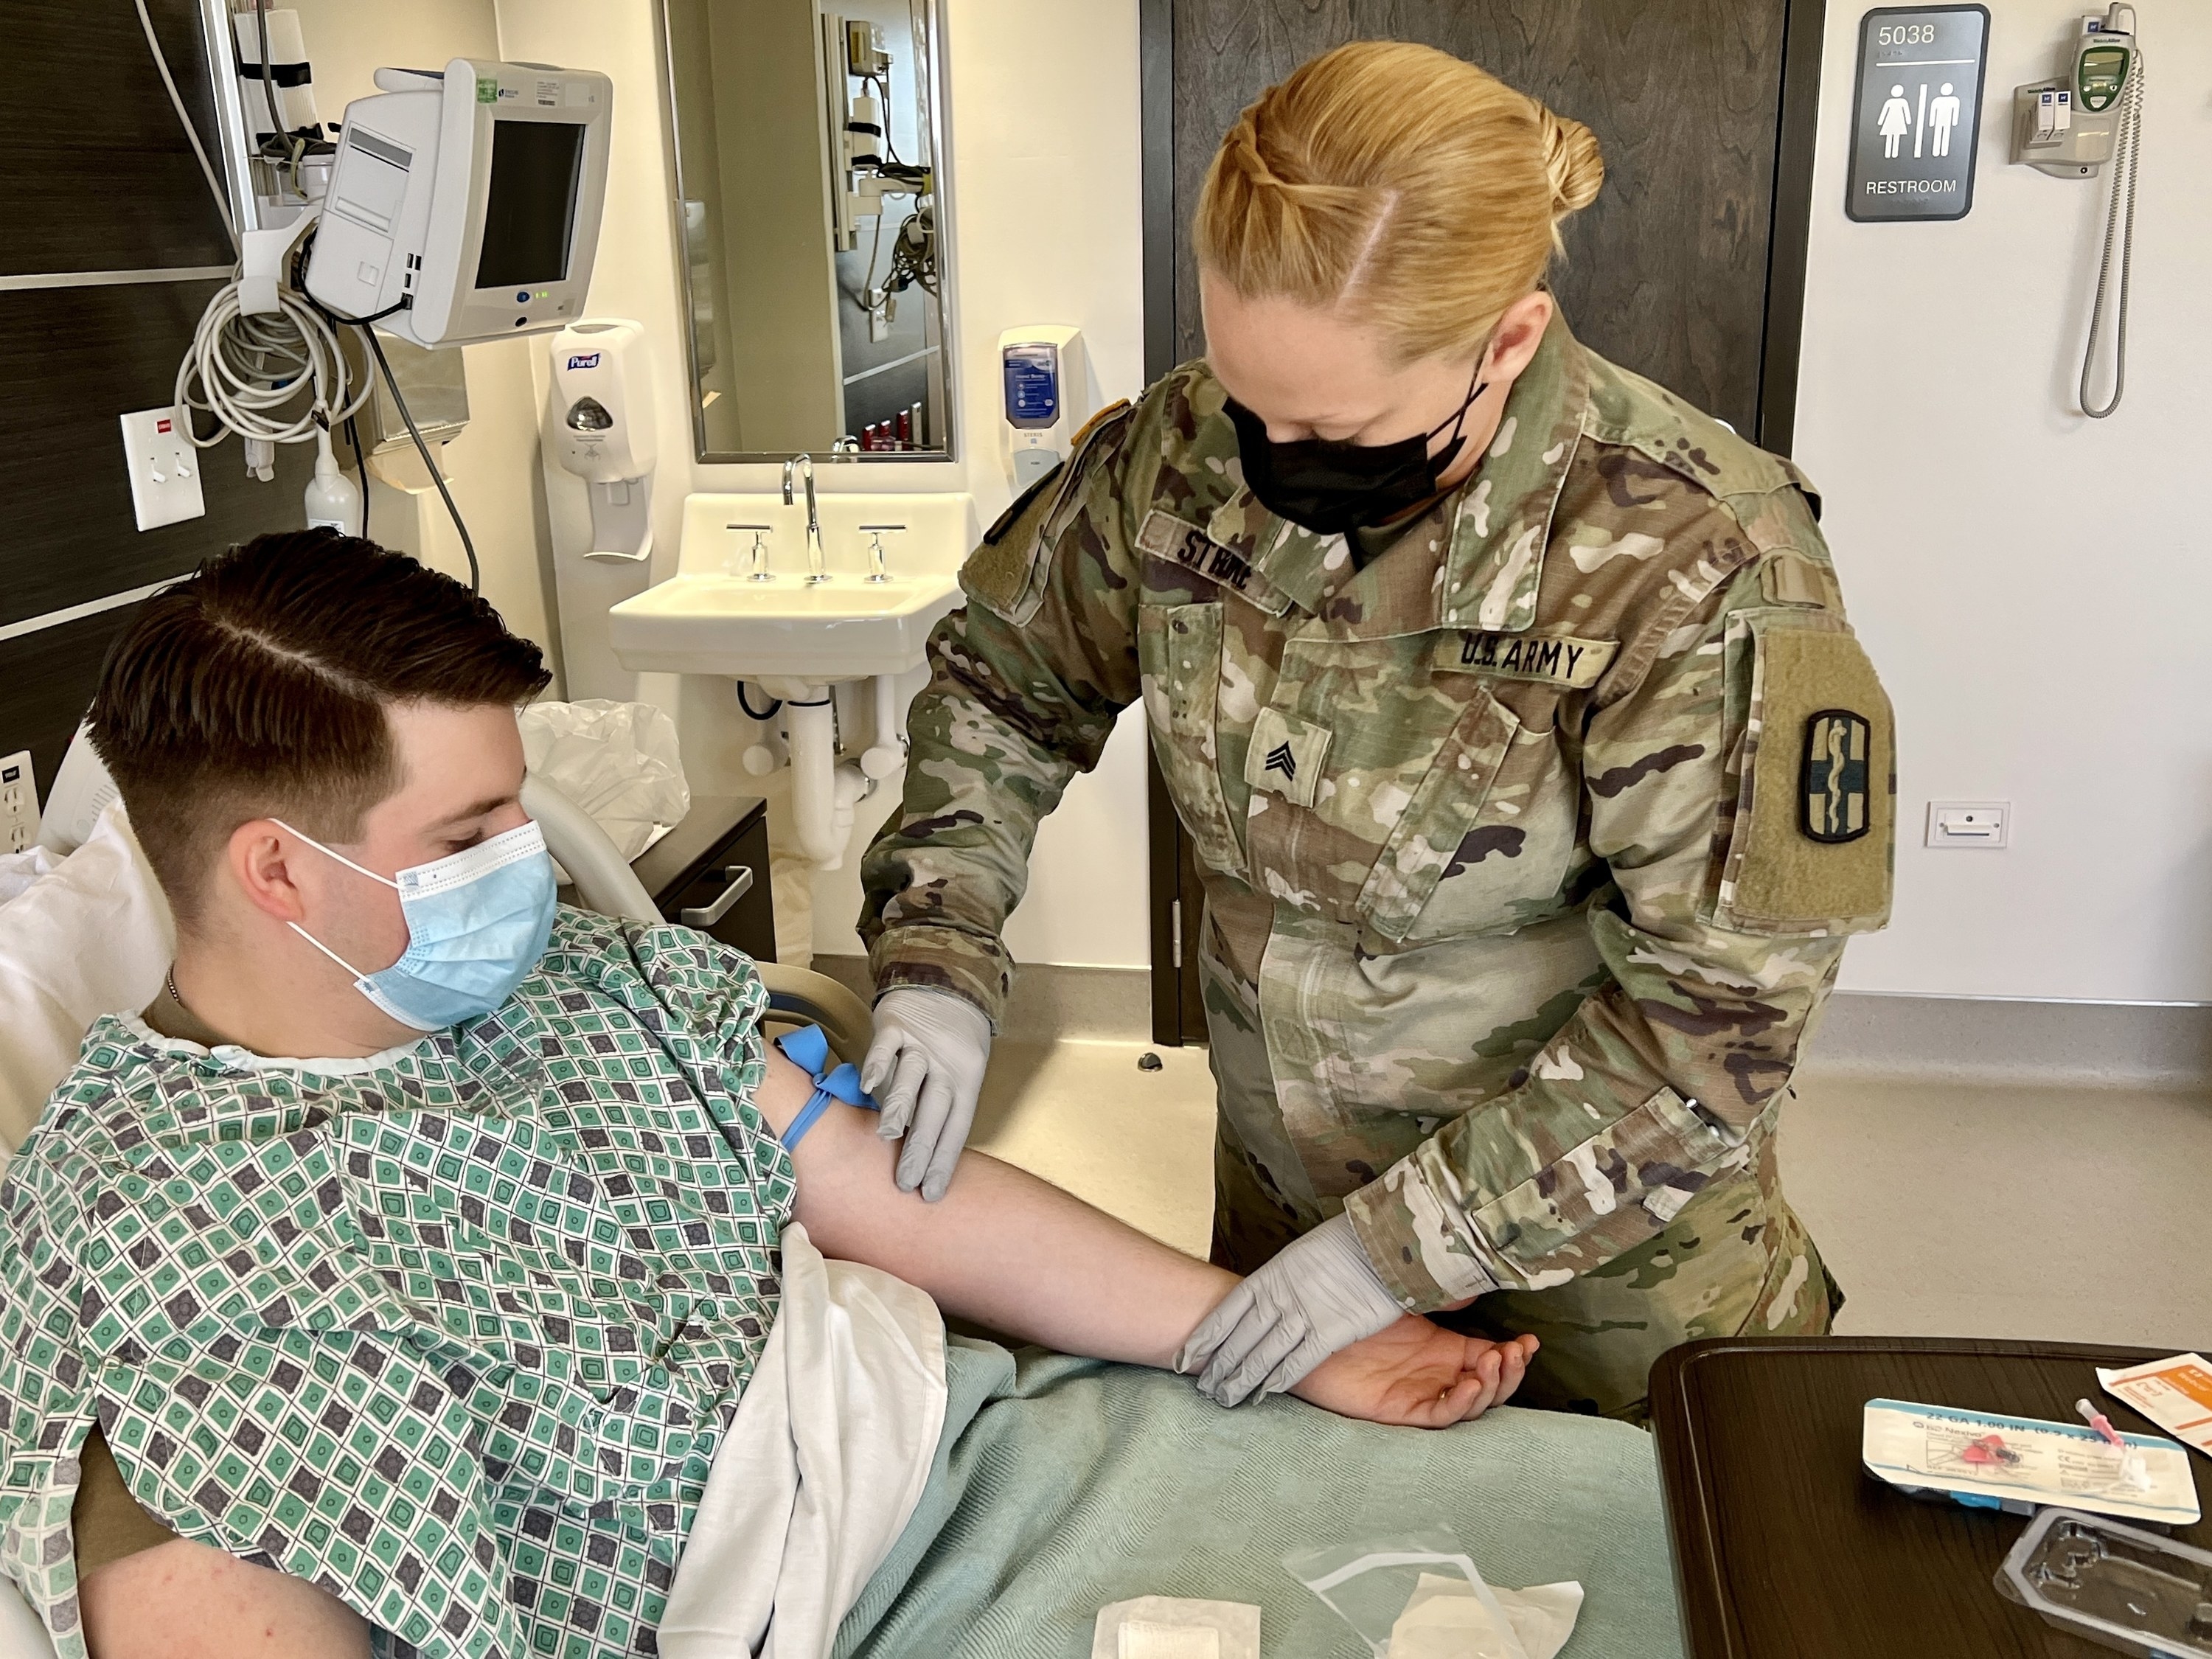 An Army doctor tends to a patient